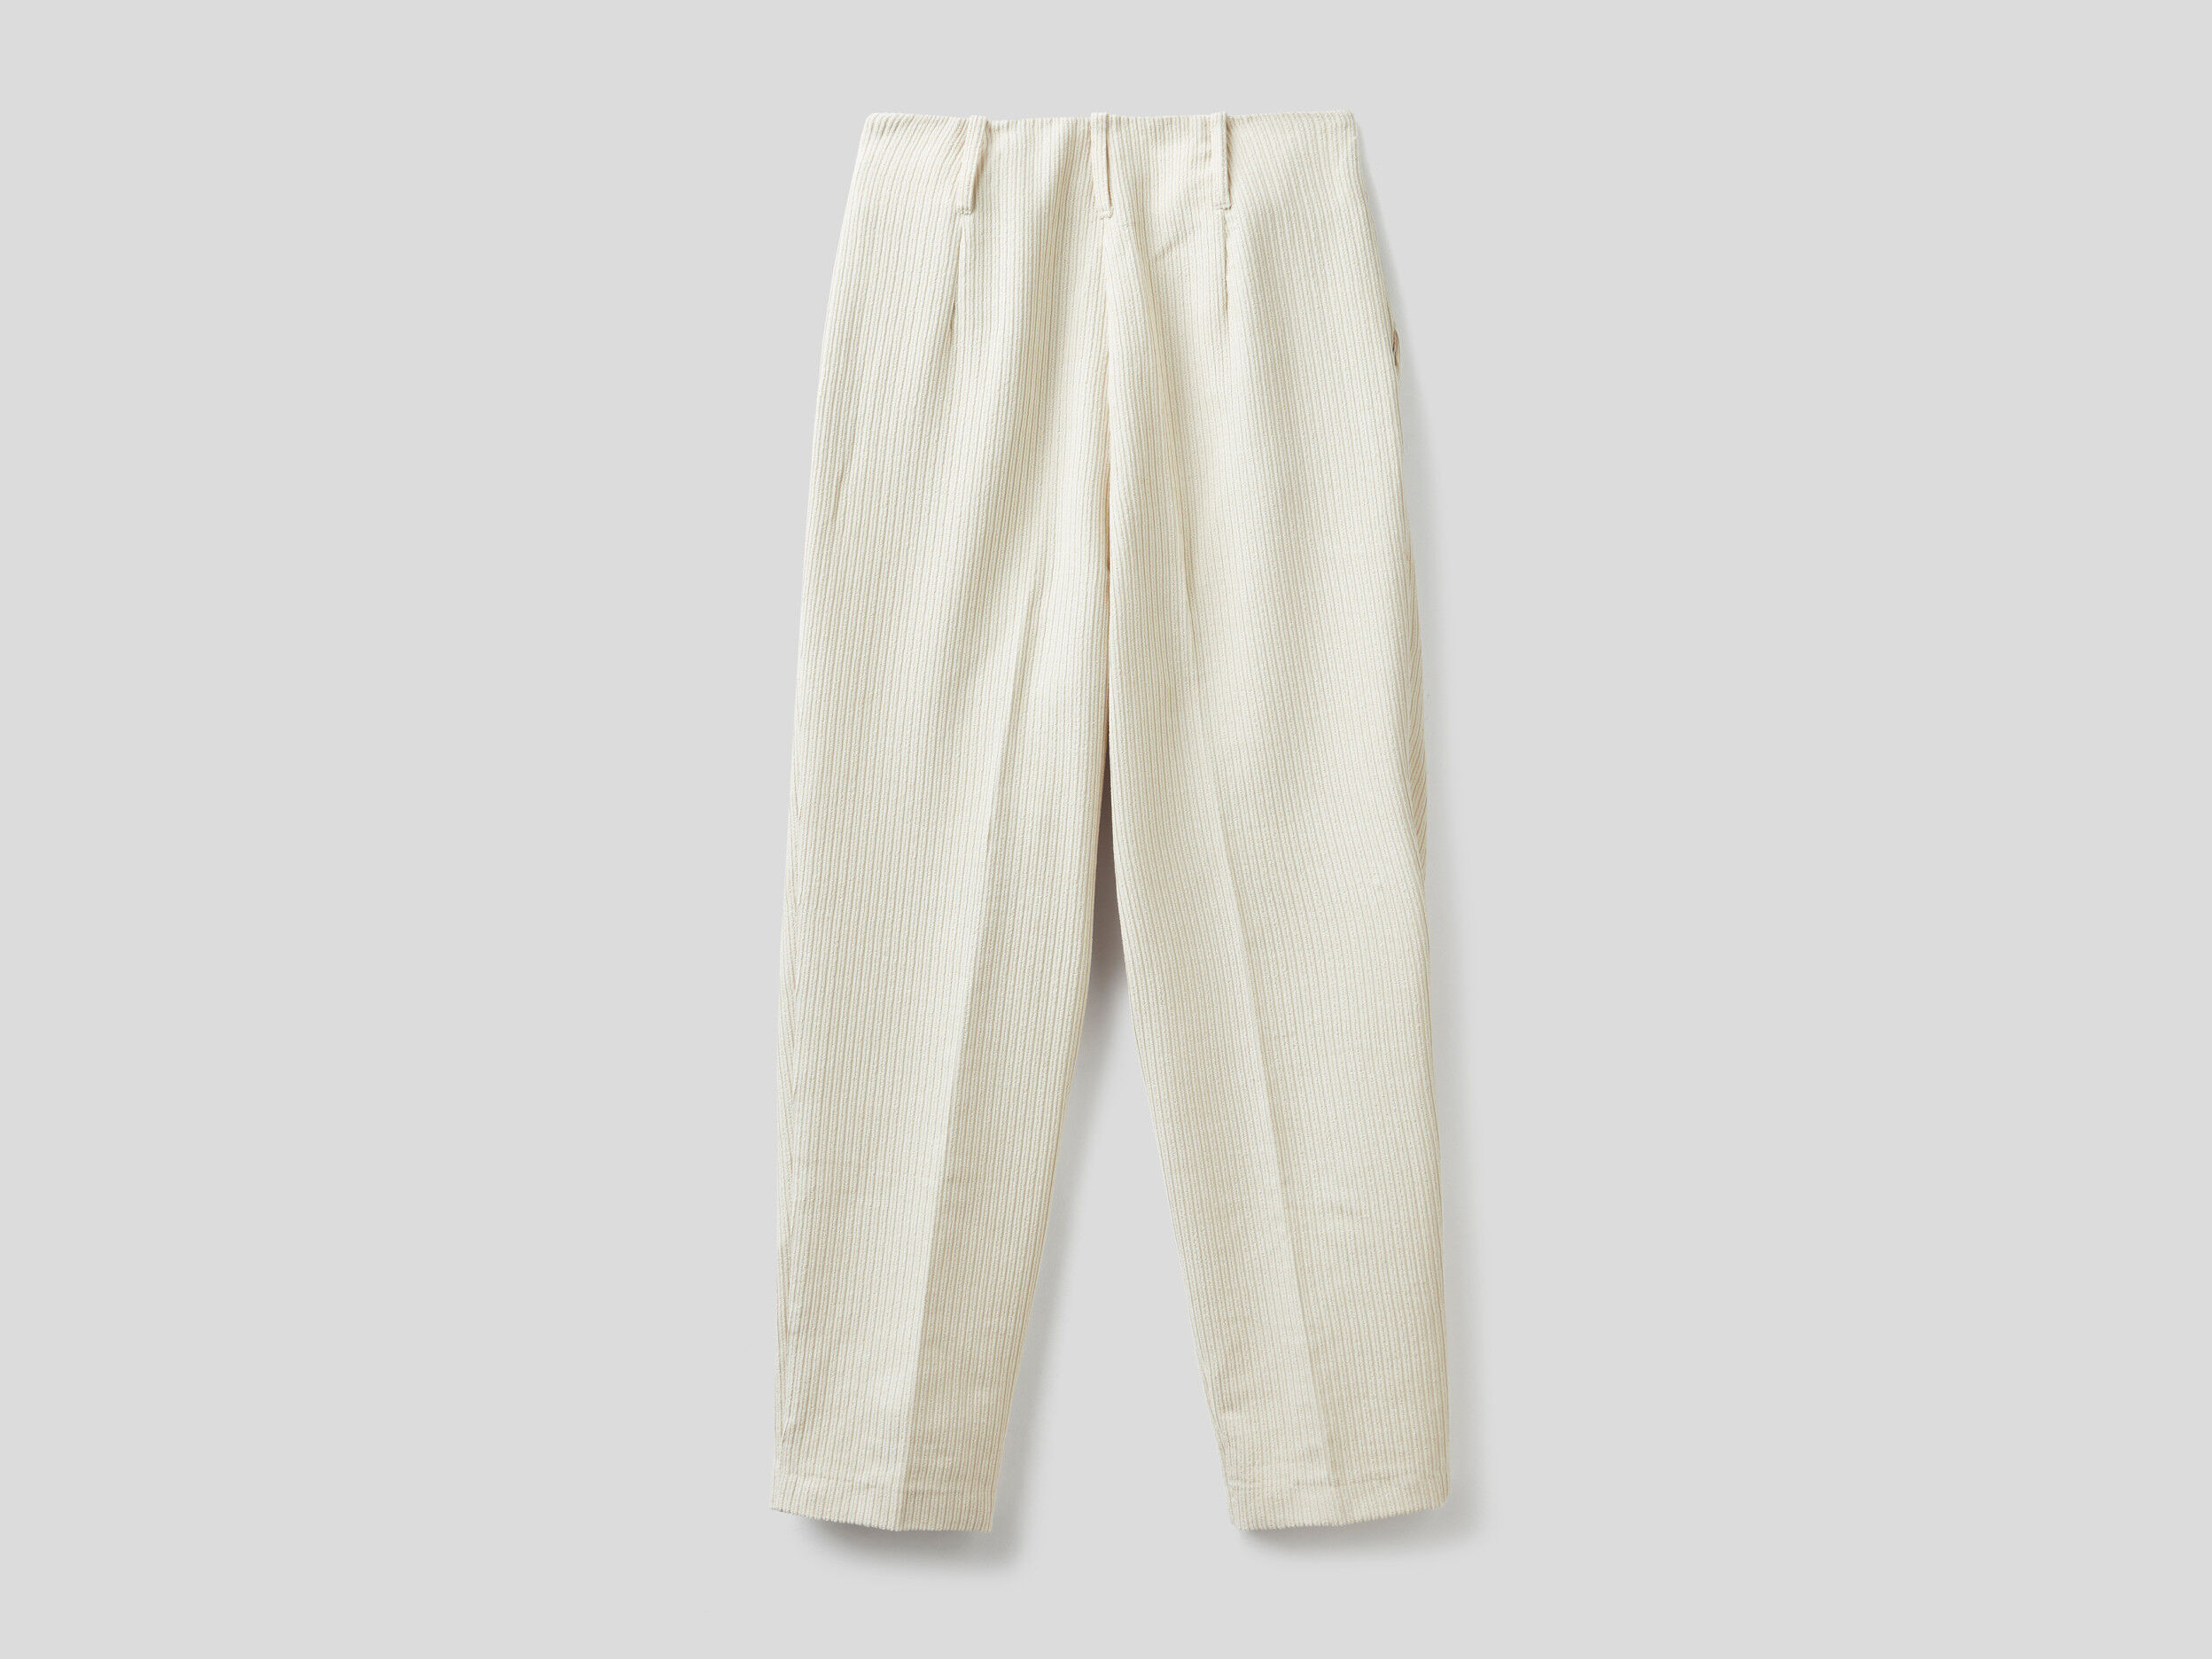 Ankle-length corduroy trousers - Cream - Ladies | H&M IN